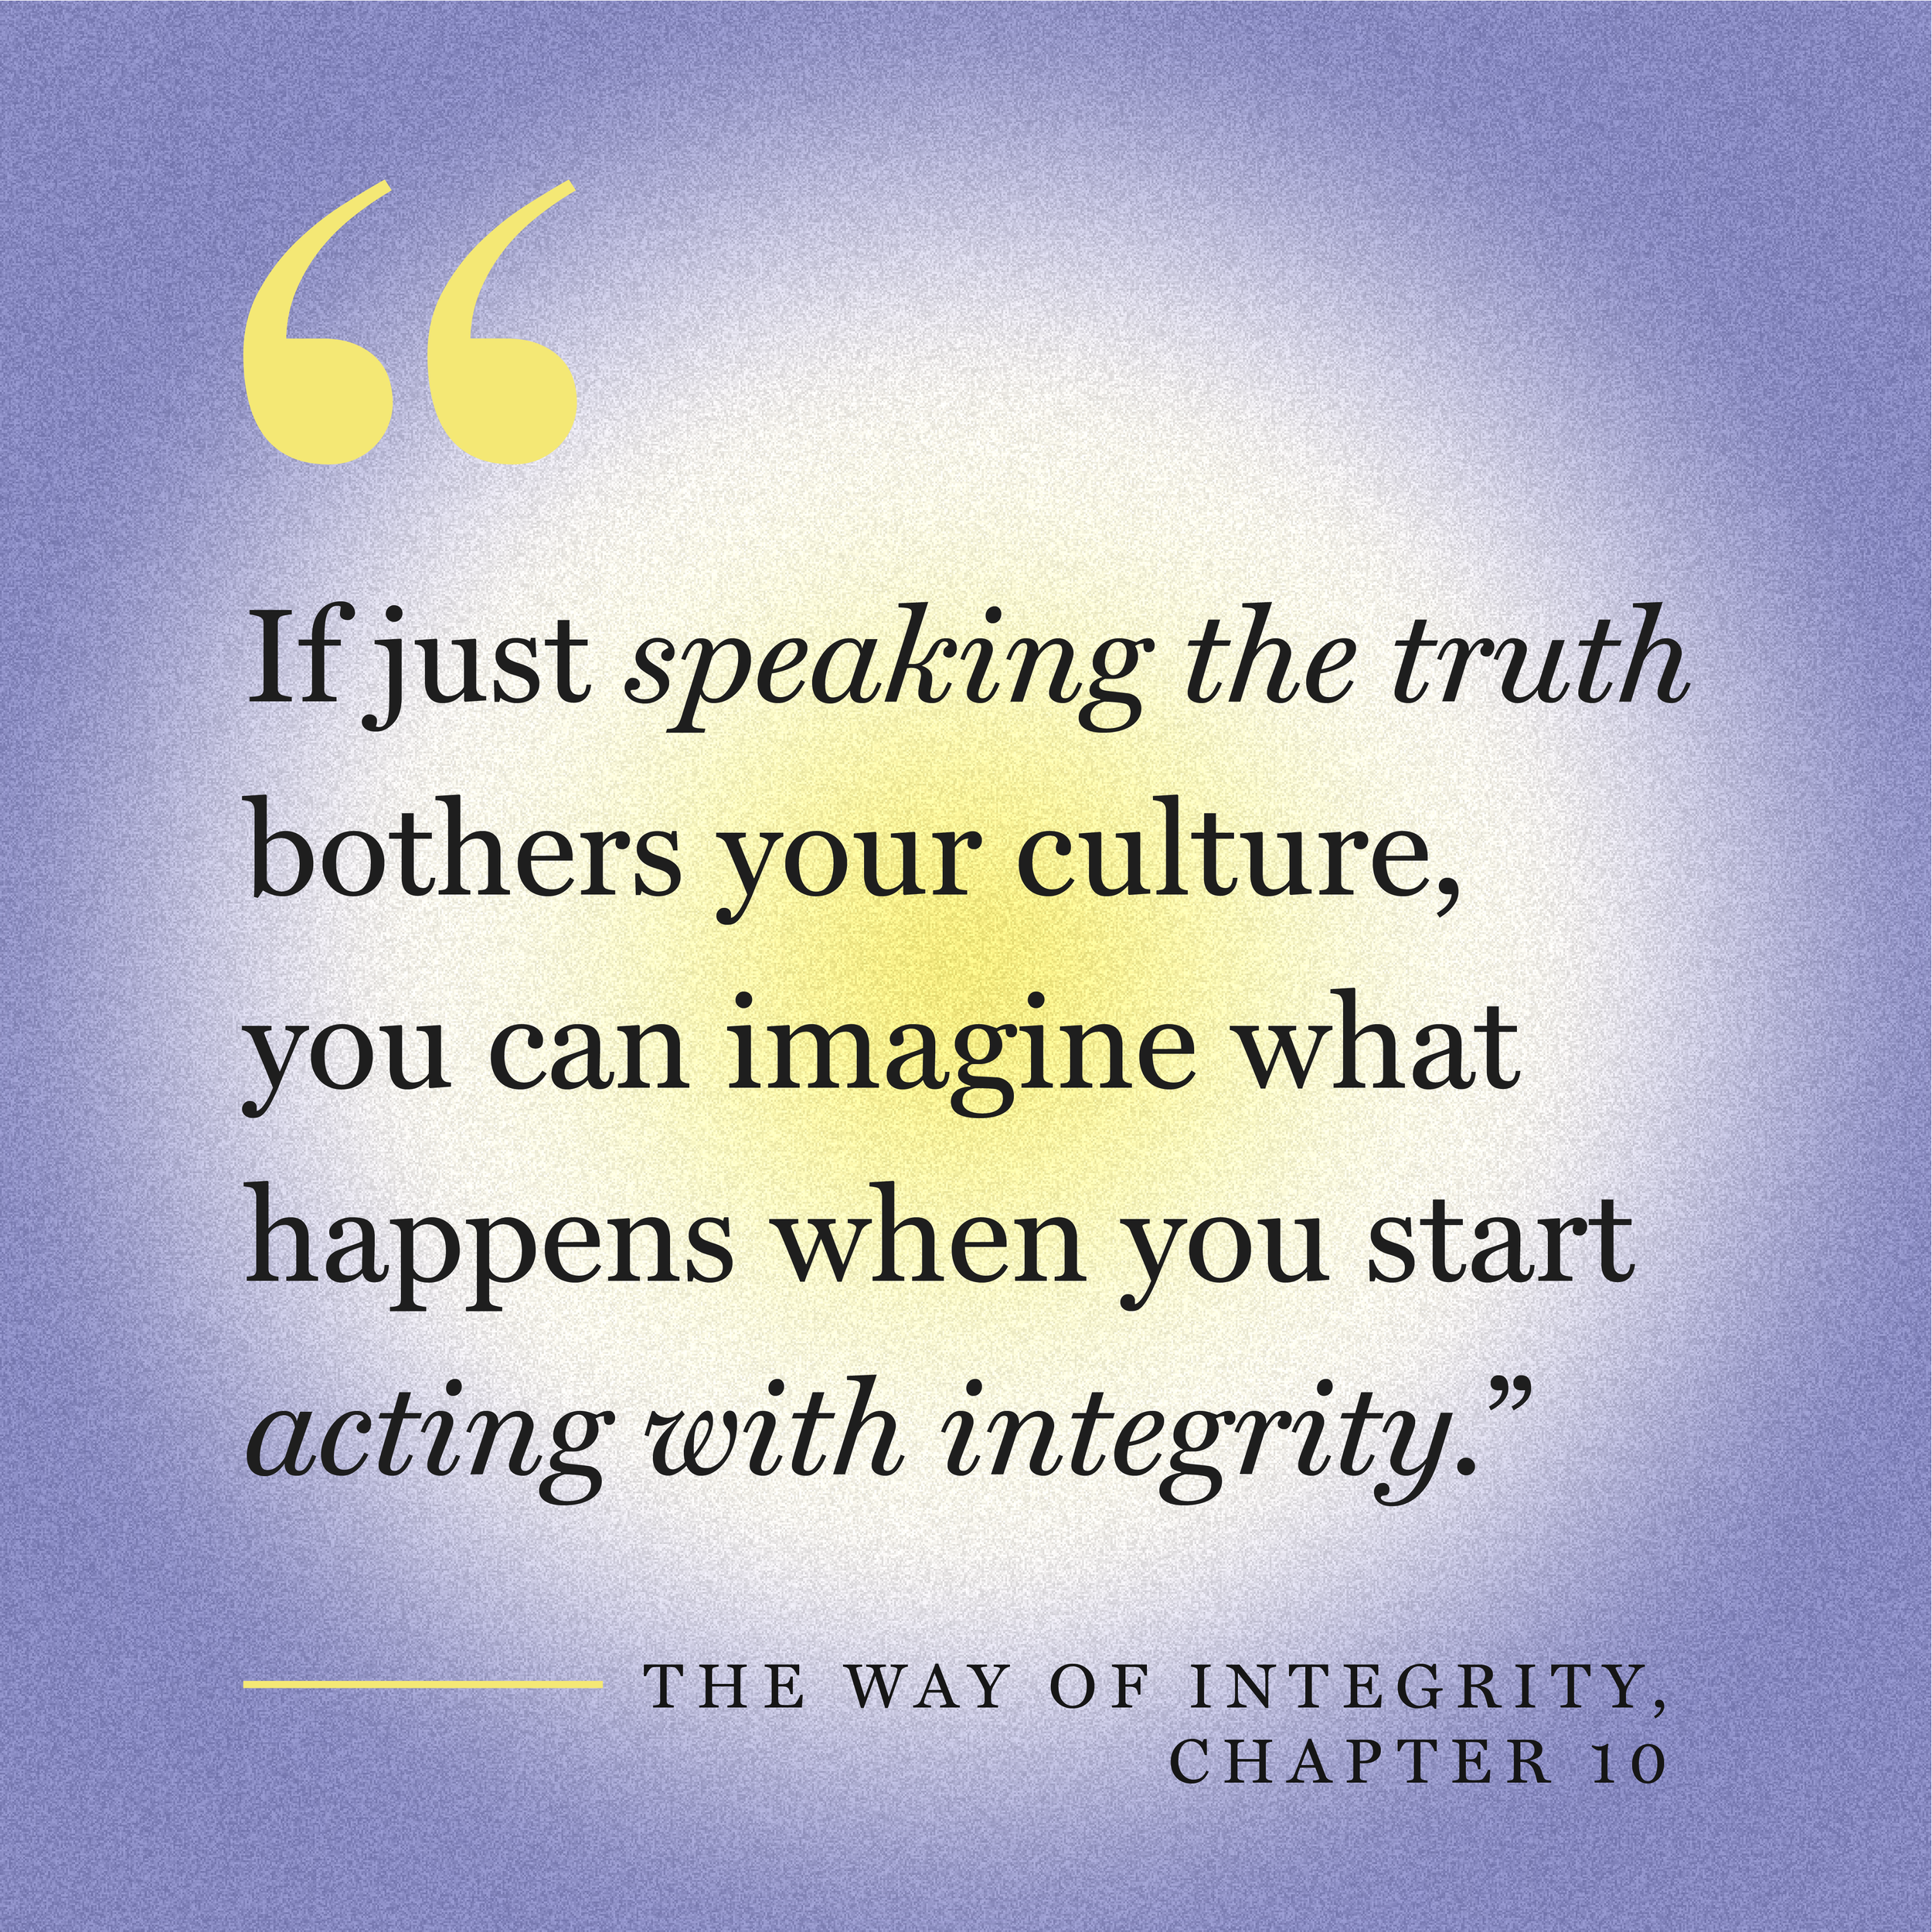 OBC_Integrity_CHAPTER10_QUOTE.png